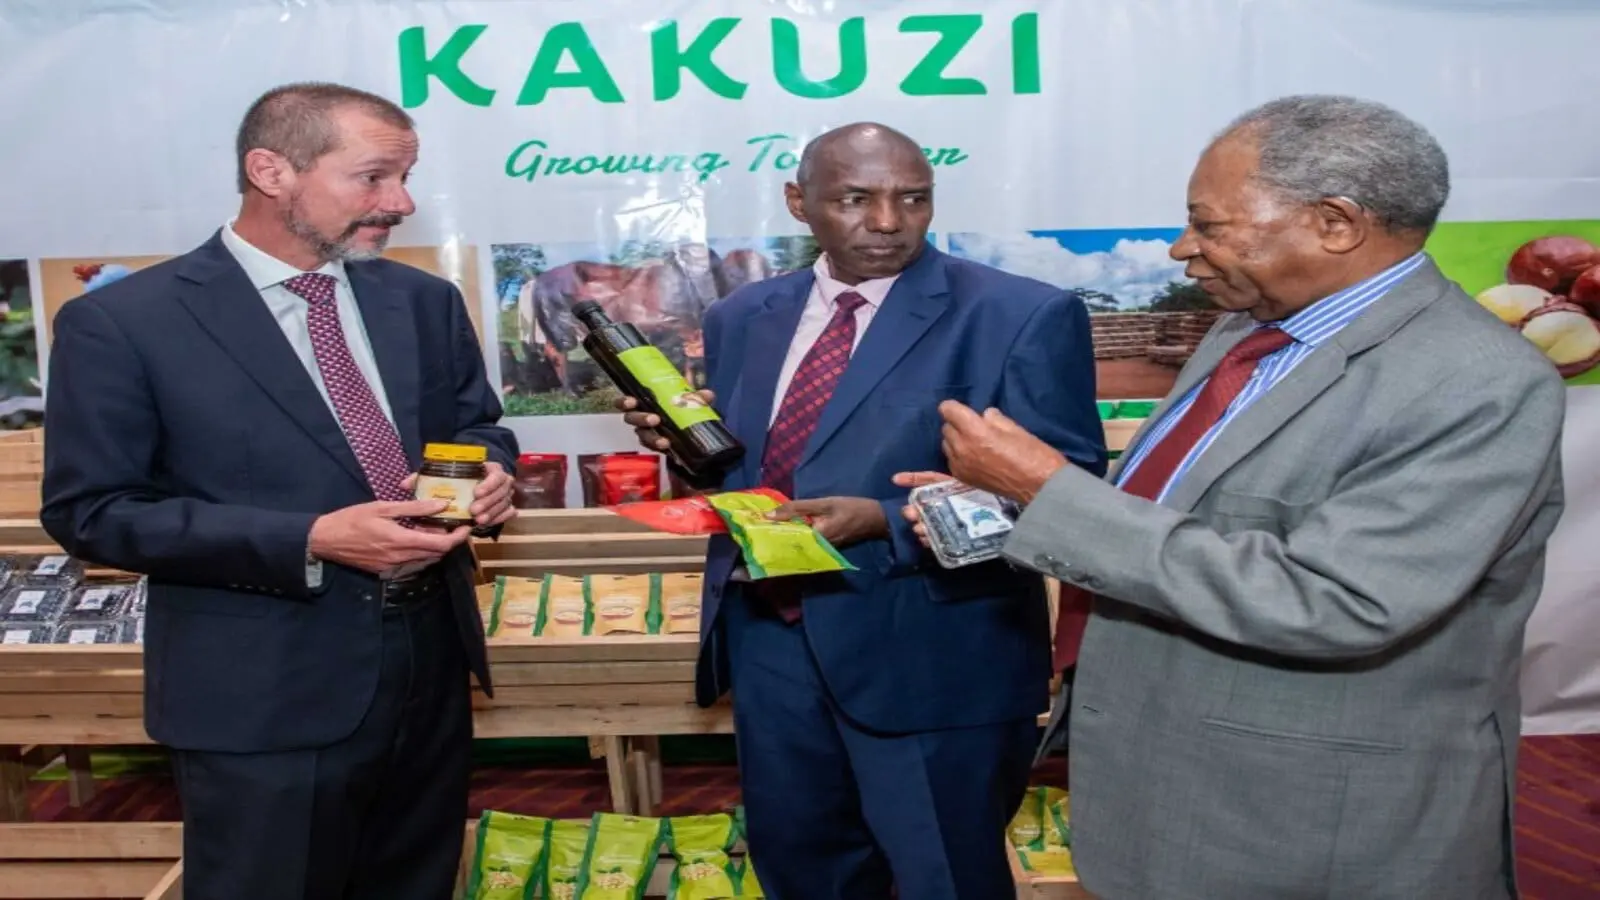 Kakuzi Plc to unveil macadama cooking oil products as part of new corporate identity